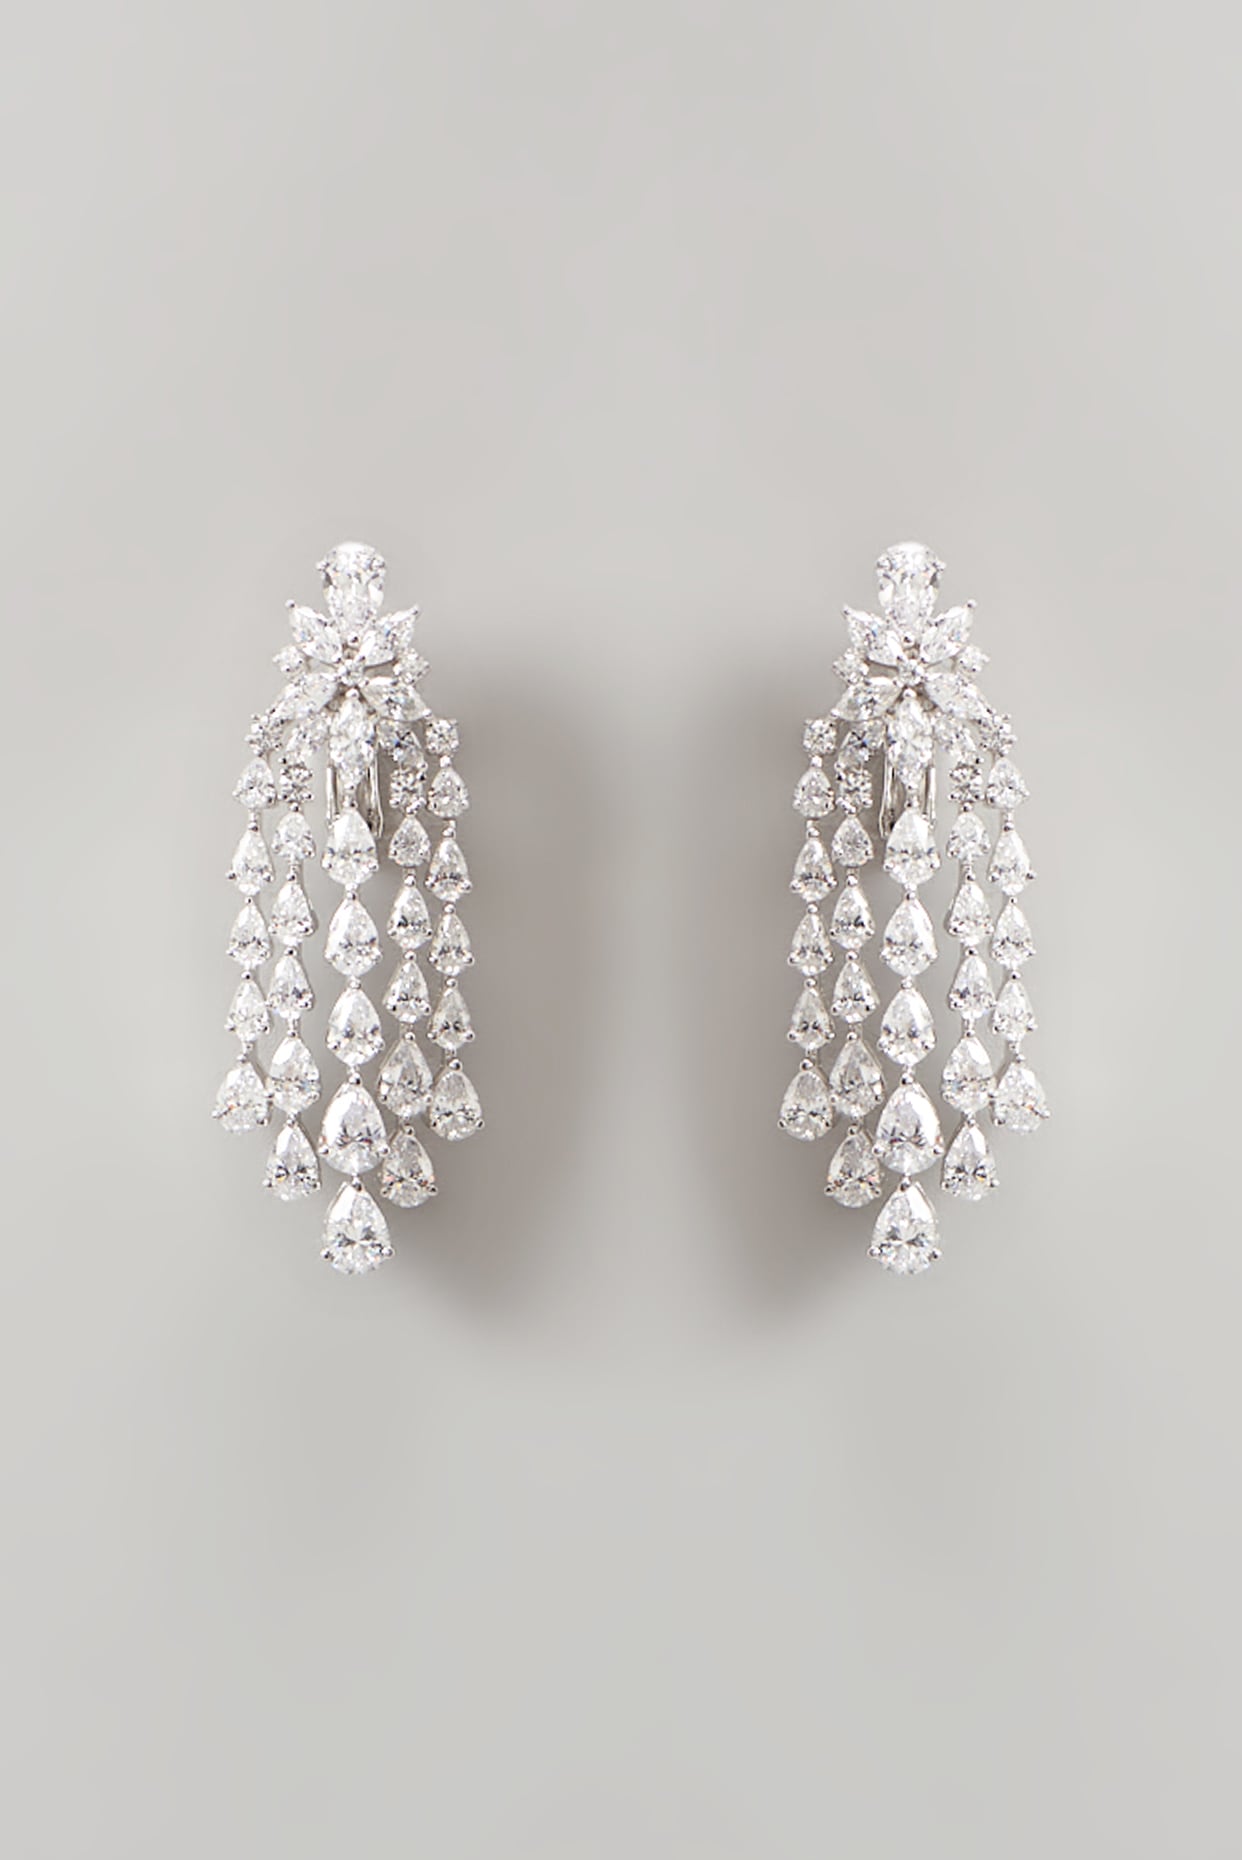 Luxury Designer Jewelry: Crystal Inlay Dangle Earrings With Wreath And  Crystal Drop Chandelier Diamonds For Women And Men Perfect For Weddings And  Parties From Elegantmaria, $21.08 | DHgate.Com